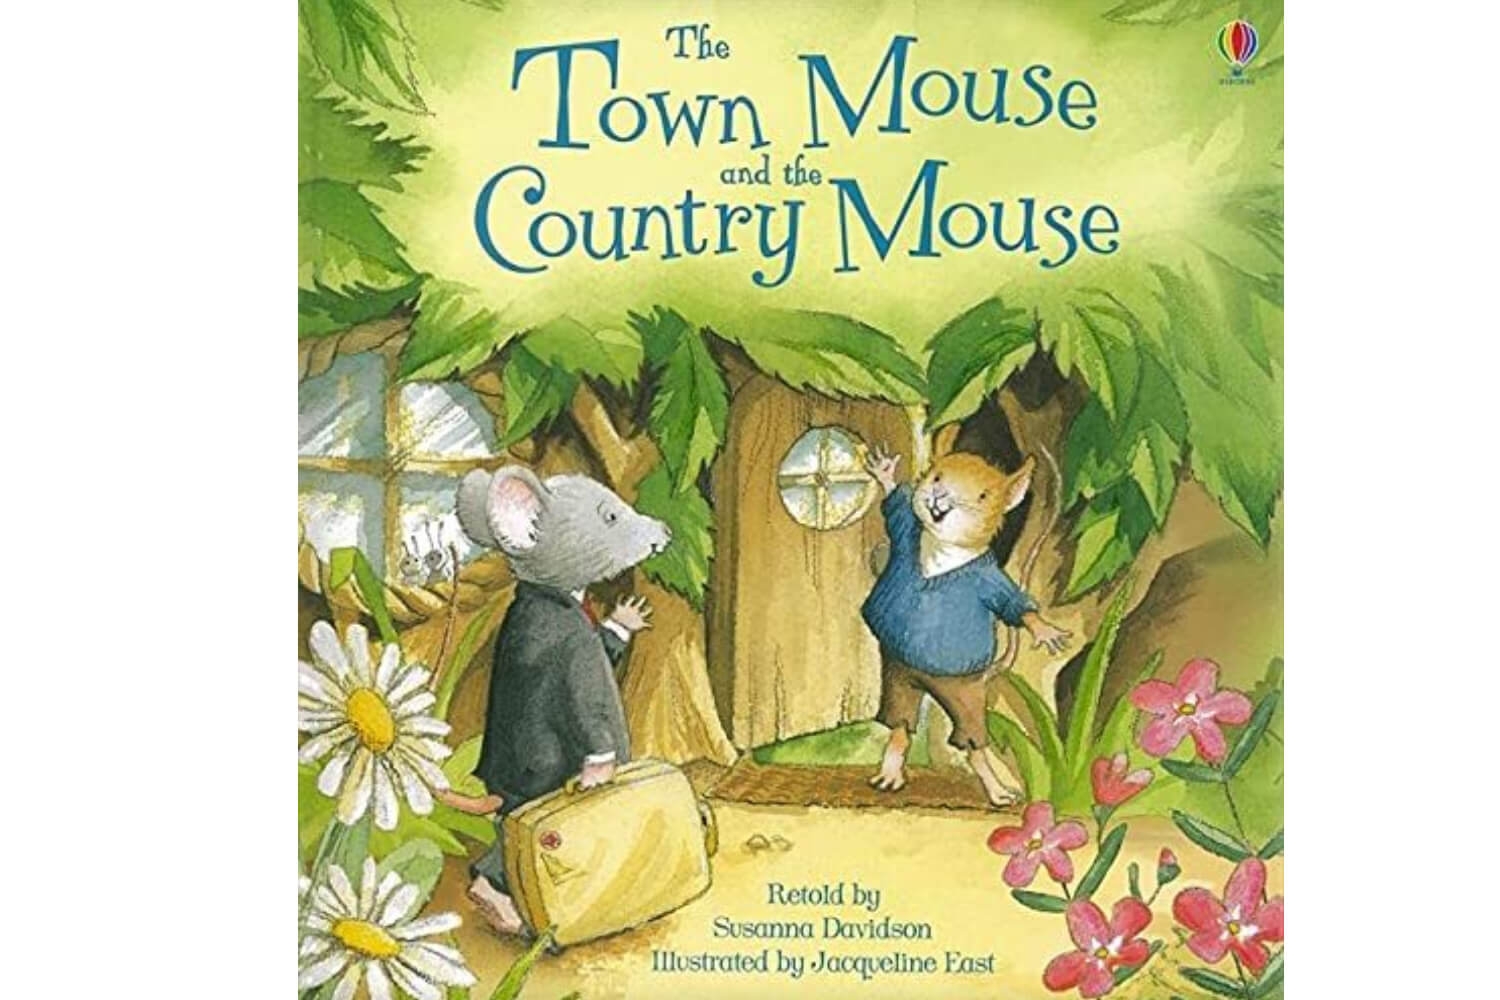 The Country Mouse and The Town Mouse